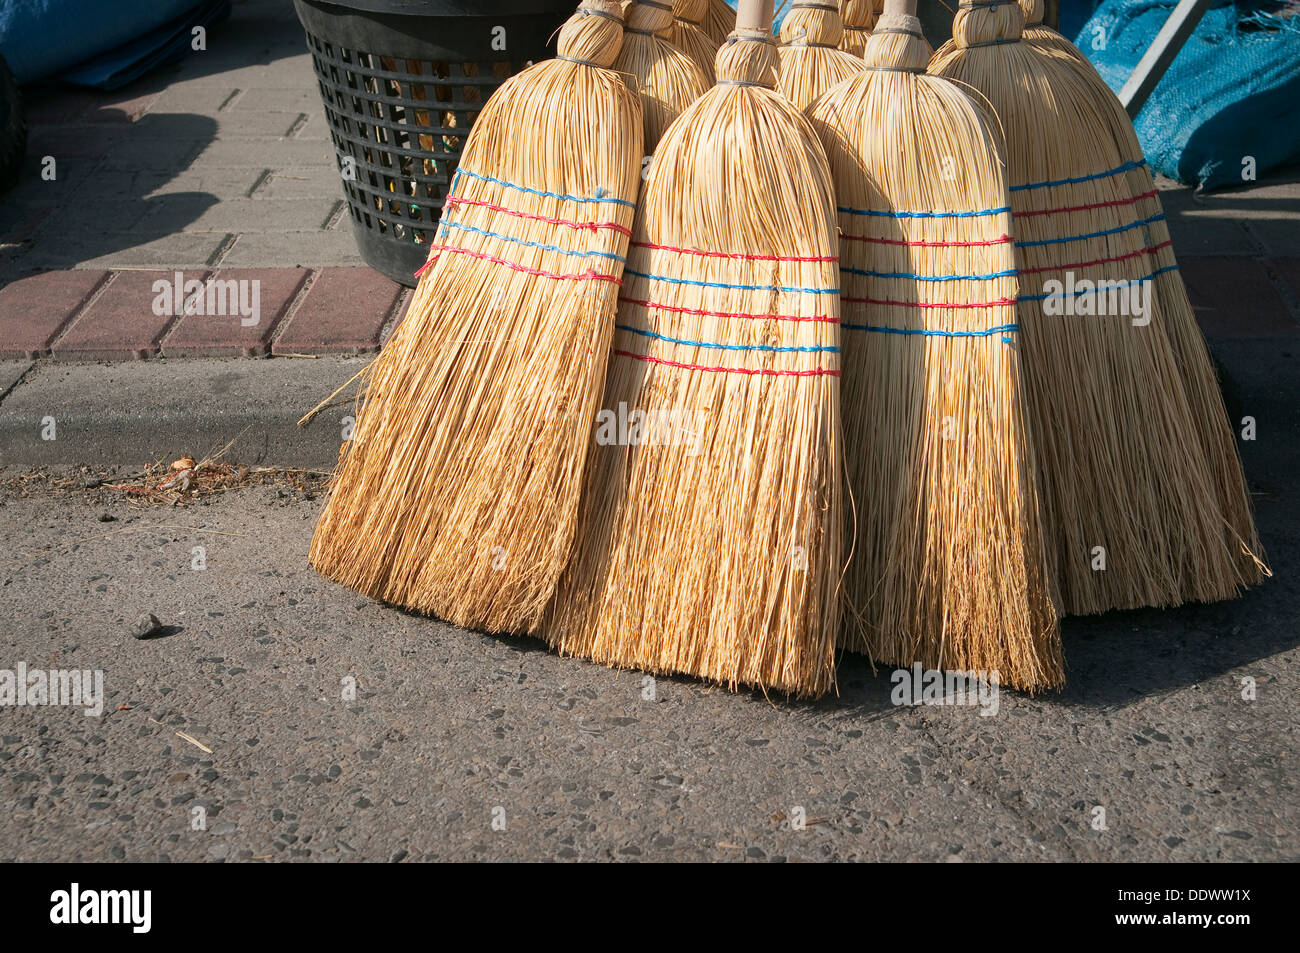 Brooms and besoms for sale at local farmers market in Wadowice, Poland.Brooms and besoms for sale at local farmers market Stock Photo